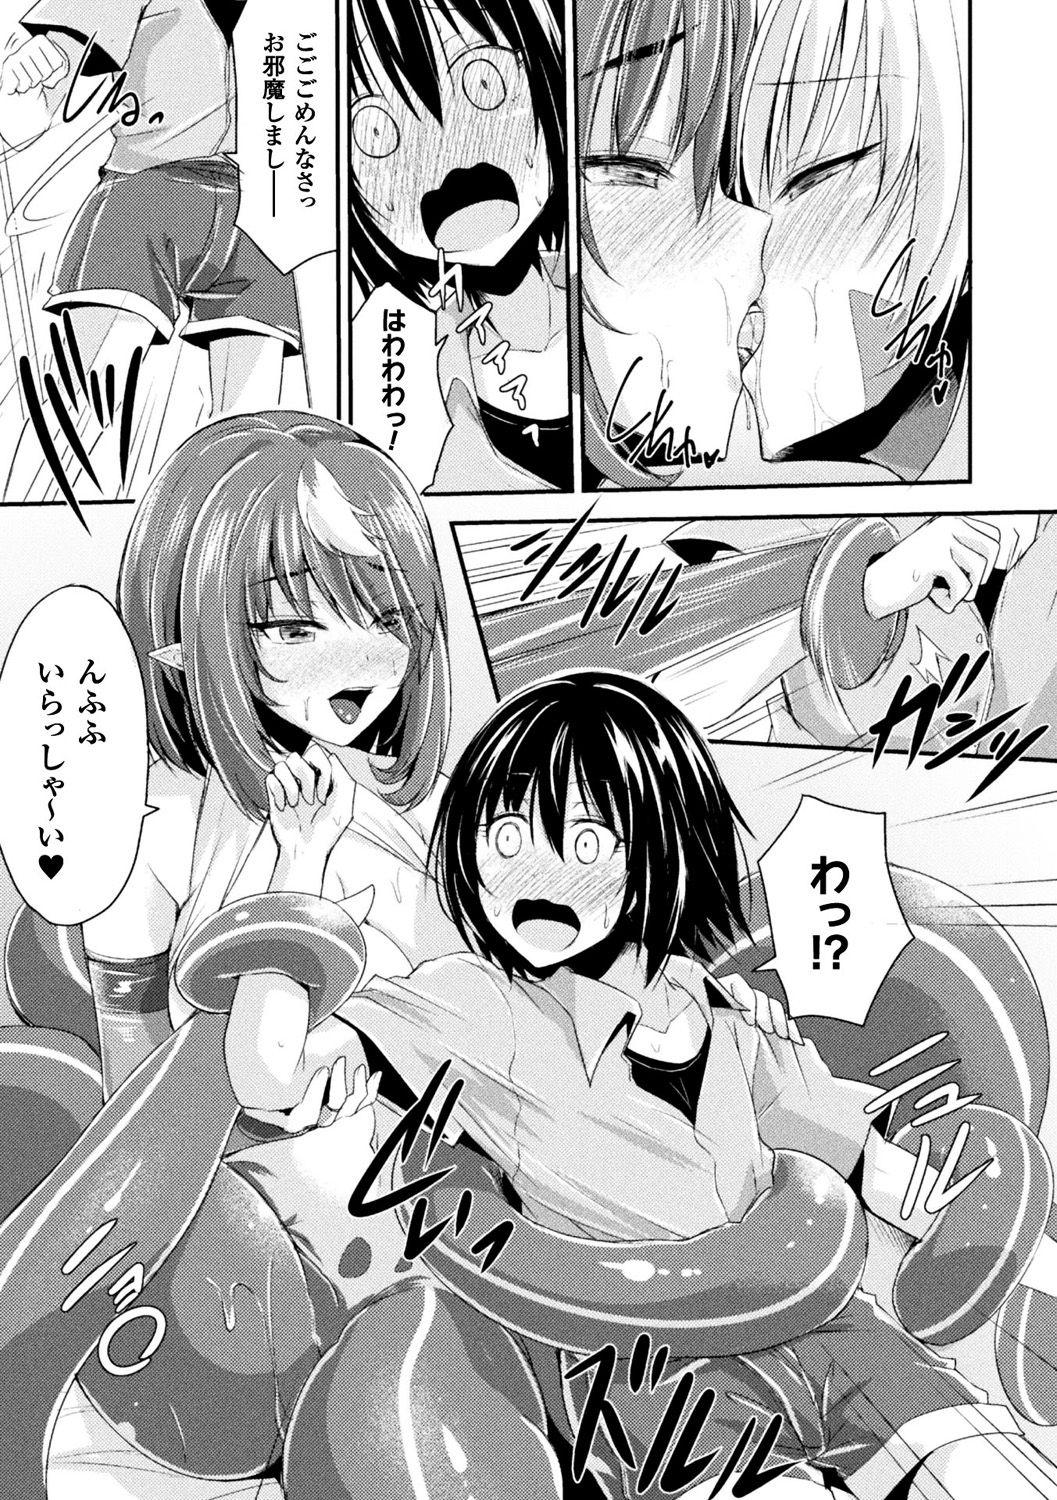 Doggystyle Bessatsu Comic Unreal Monster Musume Paradise Digital Ban Vol. 10 Riding Cock - Page 7